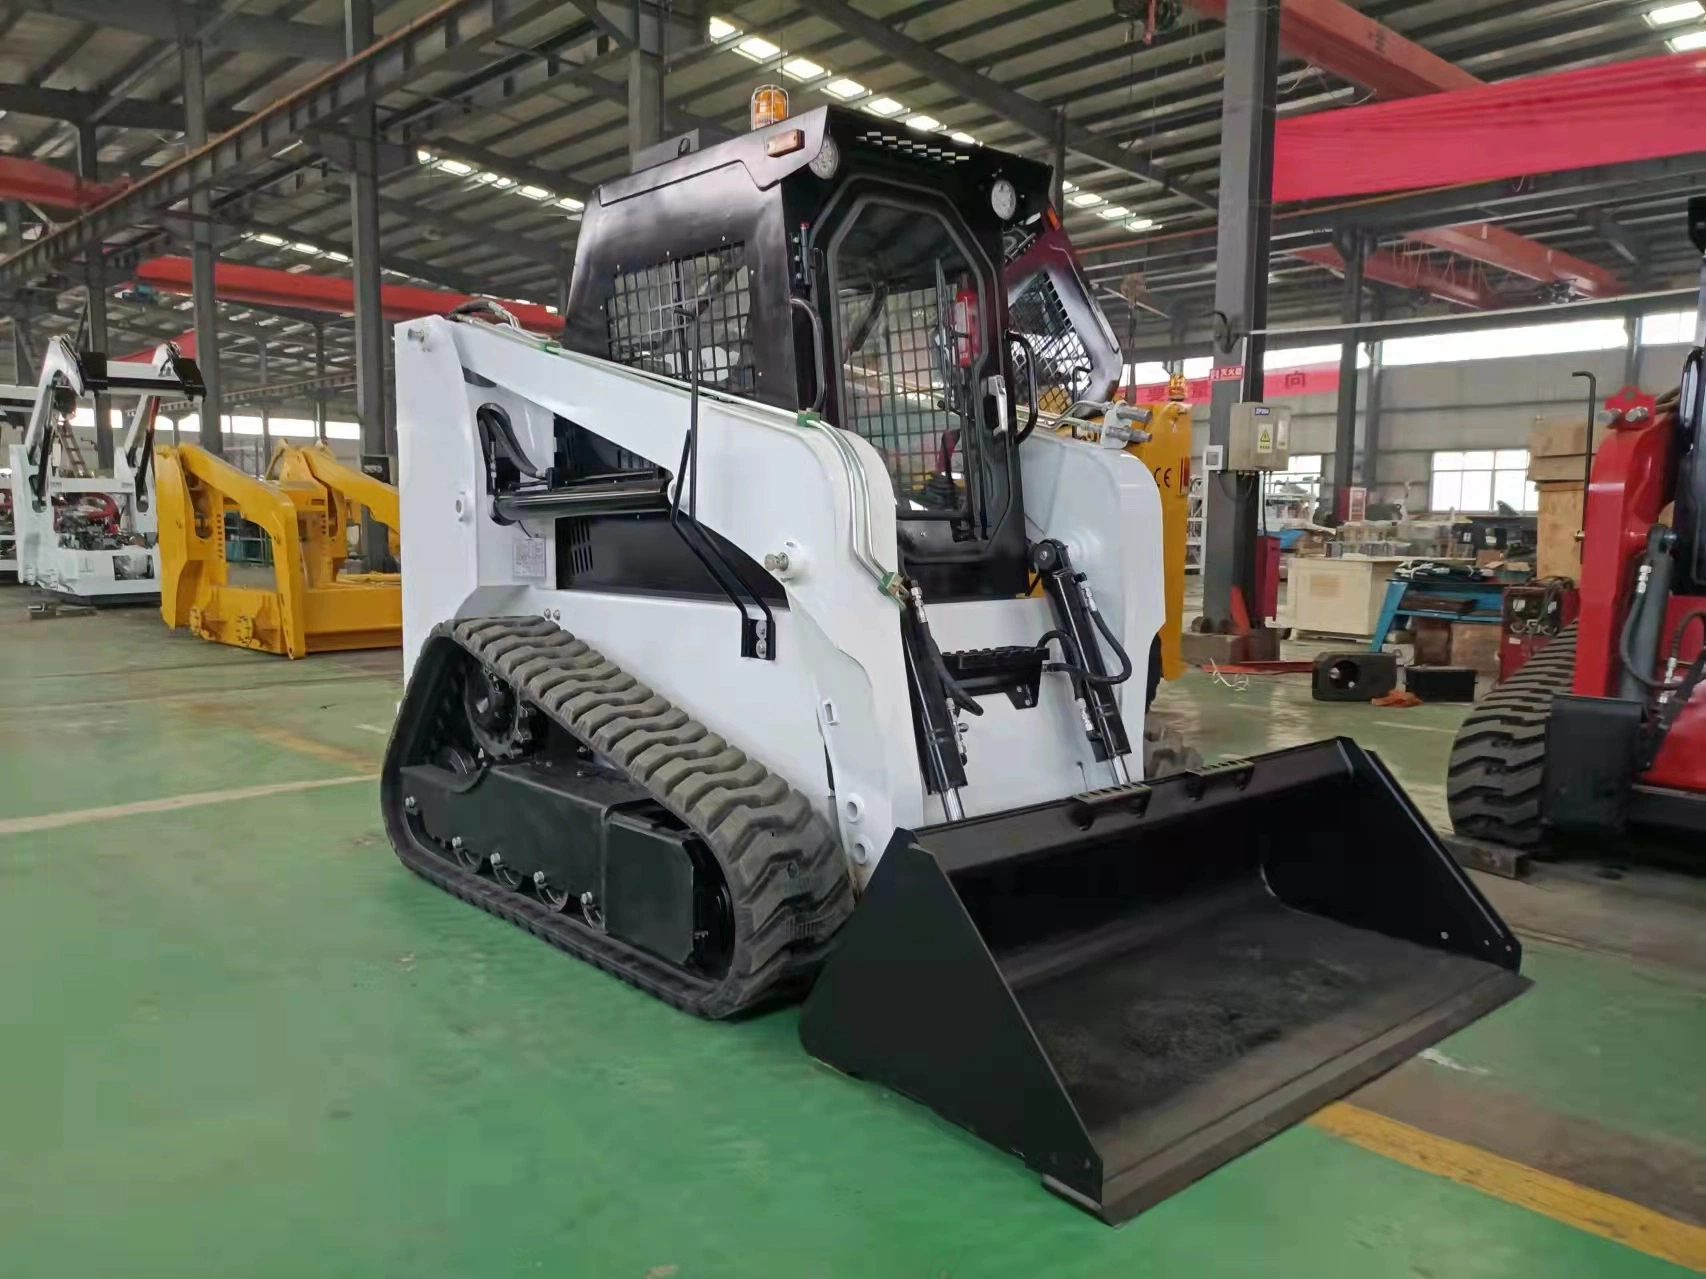 China New Mini Track Skid Steer Loader Optional with Various Attachments